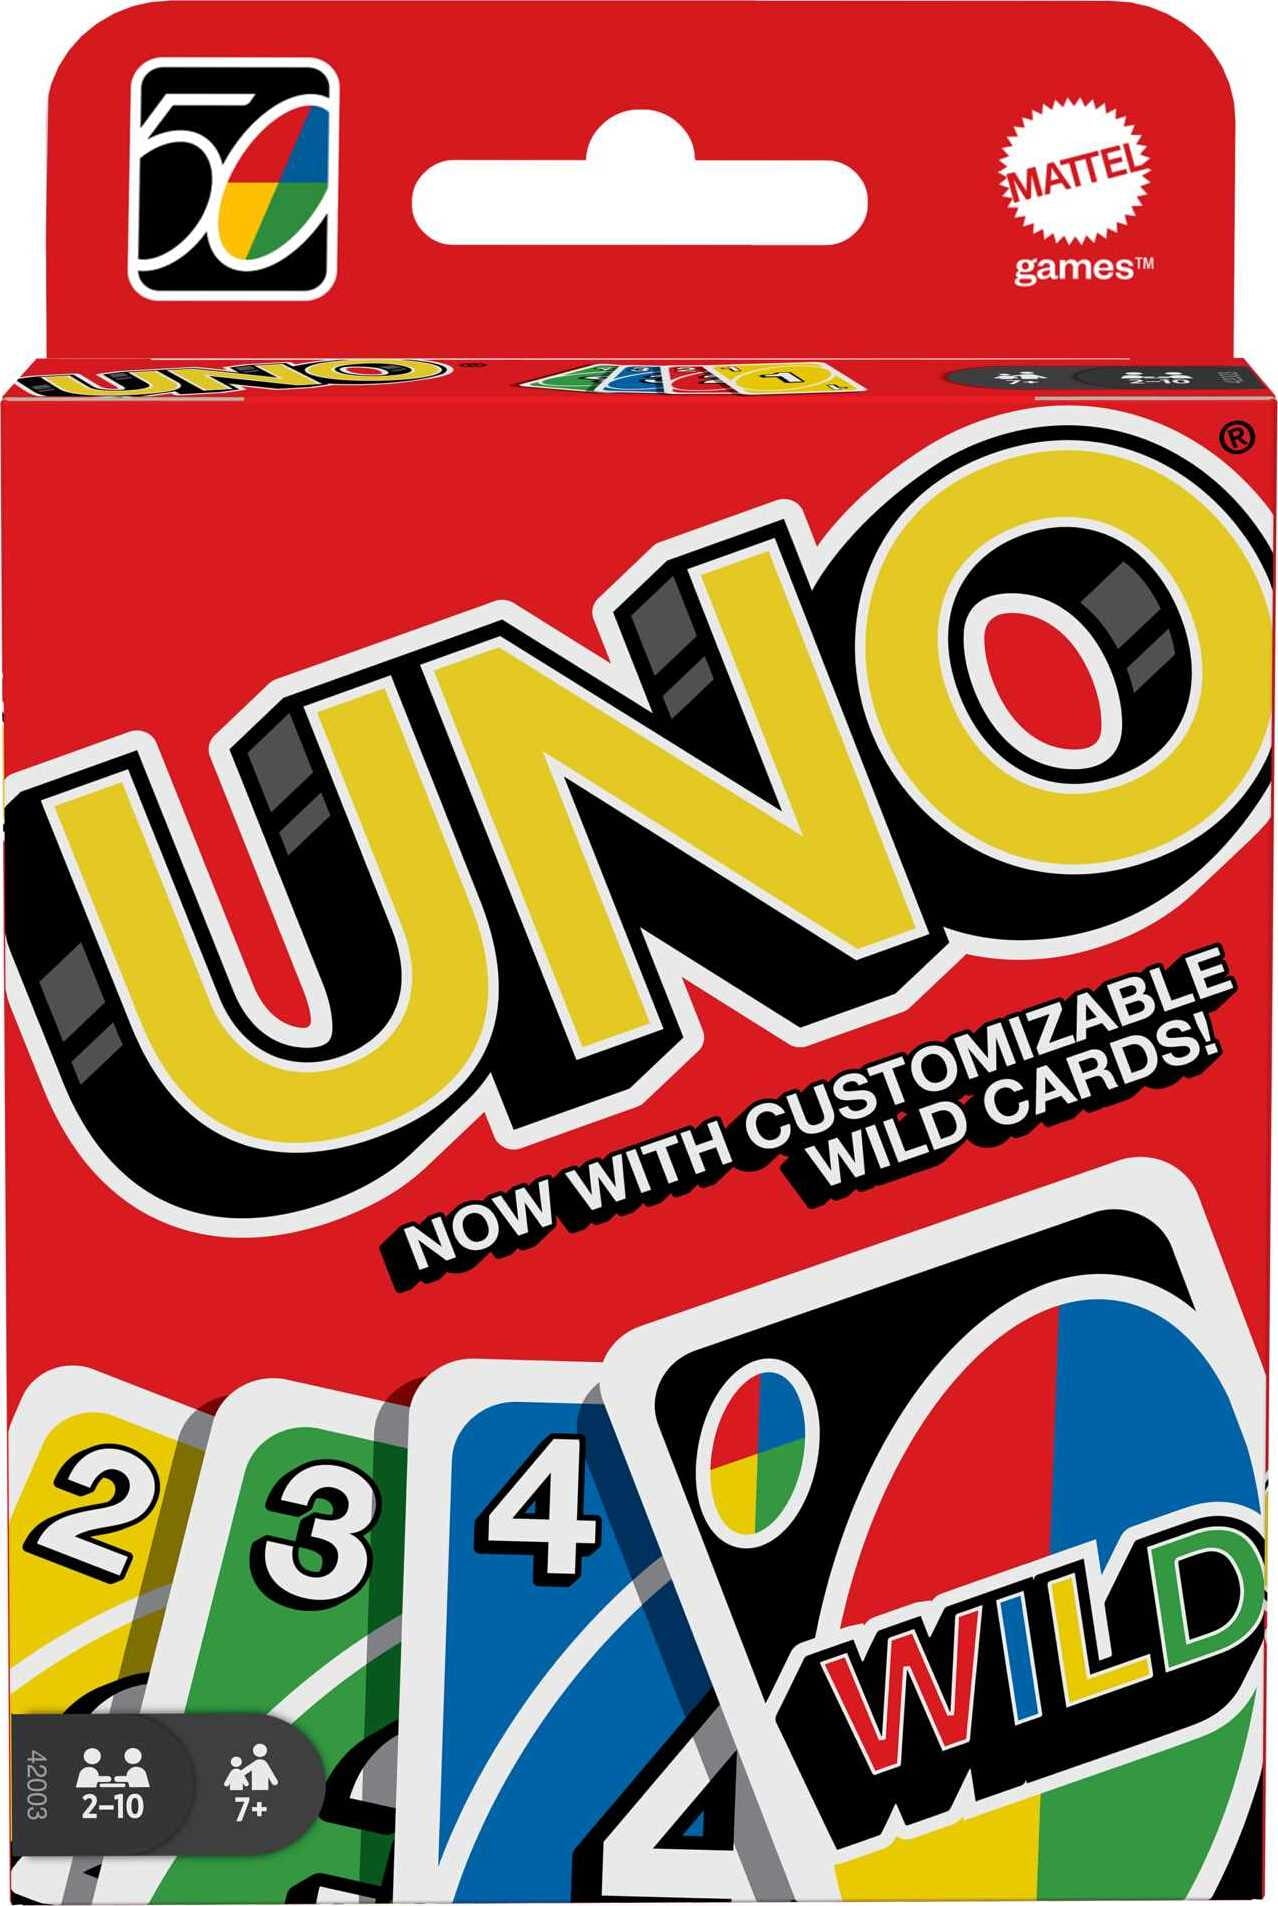 UNO Color & Number Matching Card Game, Customizable Family Fun, 2-10 Players Ages 7+ (Easter Basket Item)